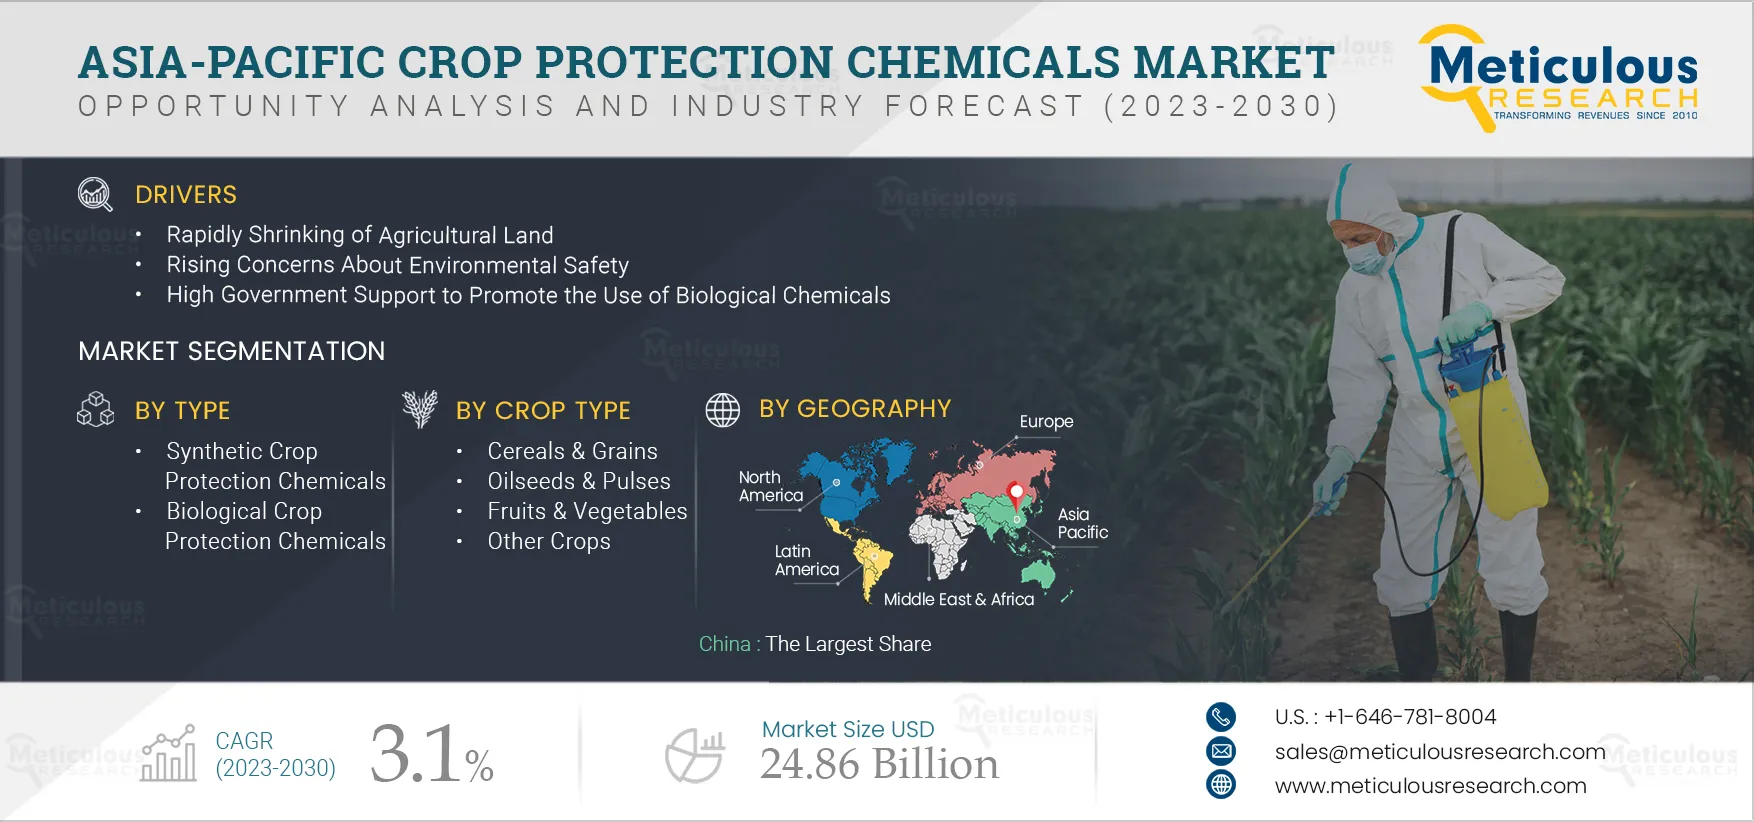 Asia-Pacific Crop Protection Chemicals Market